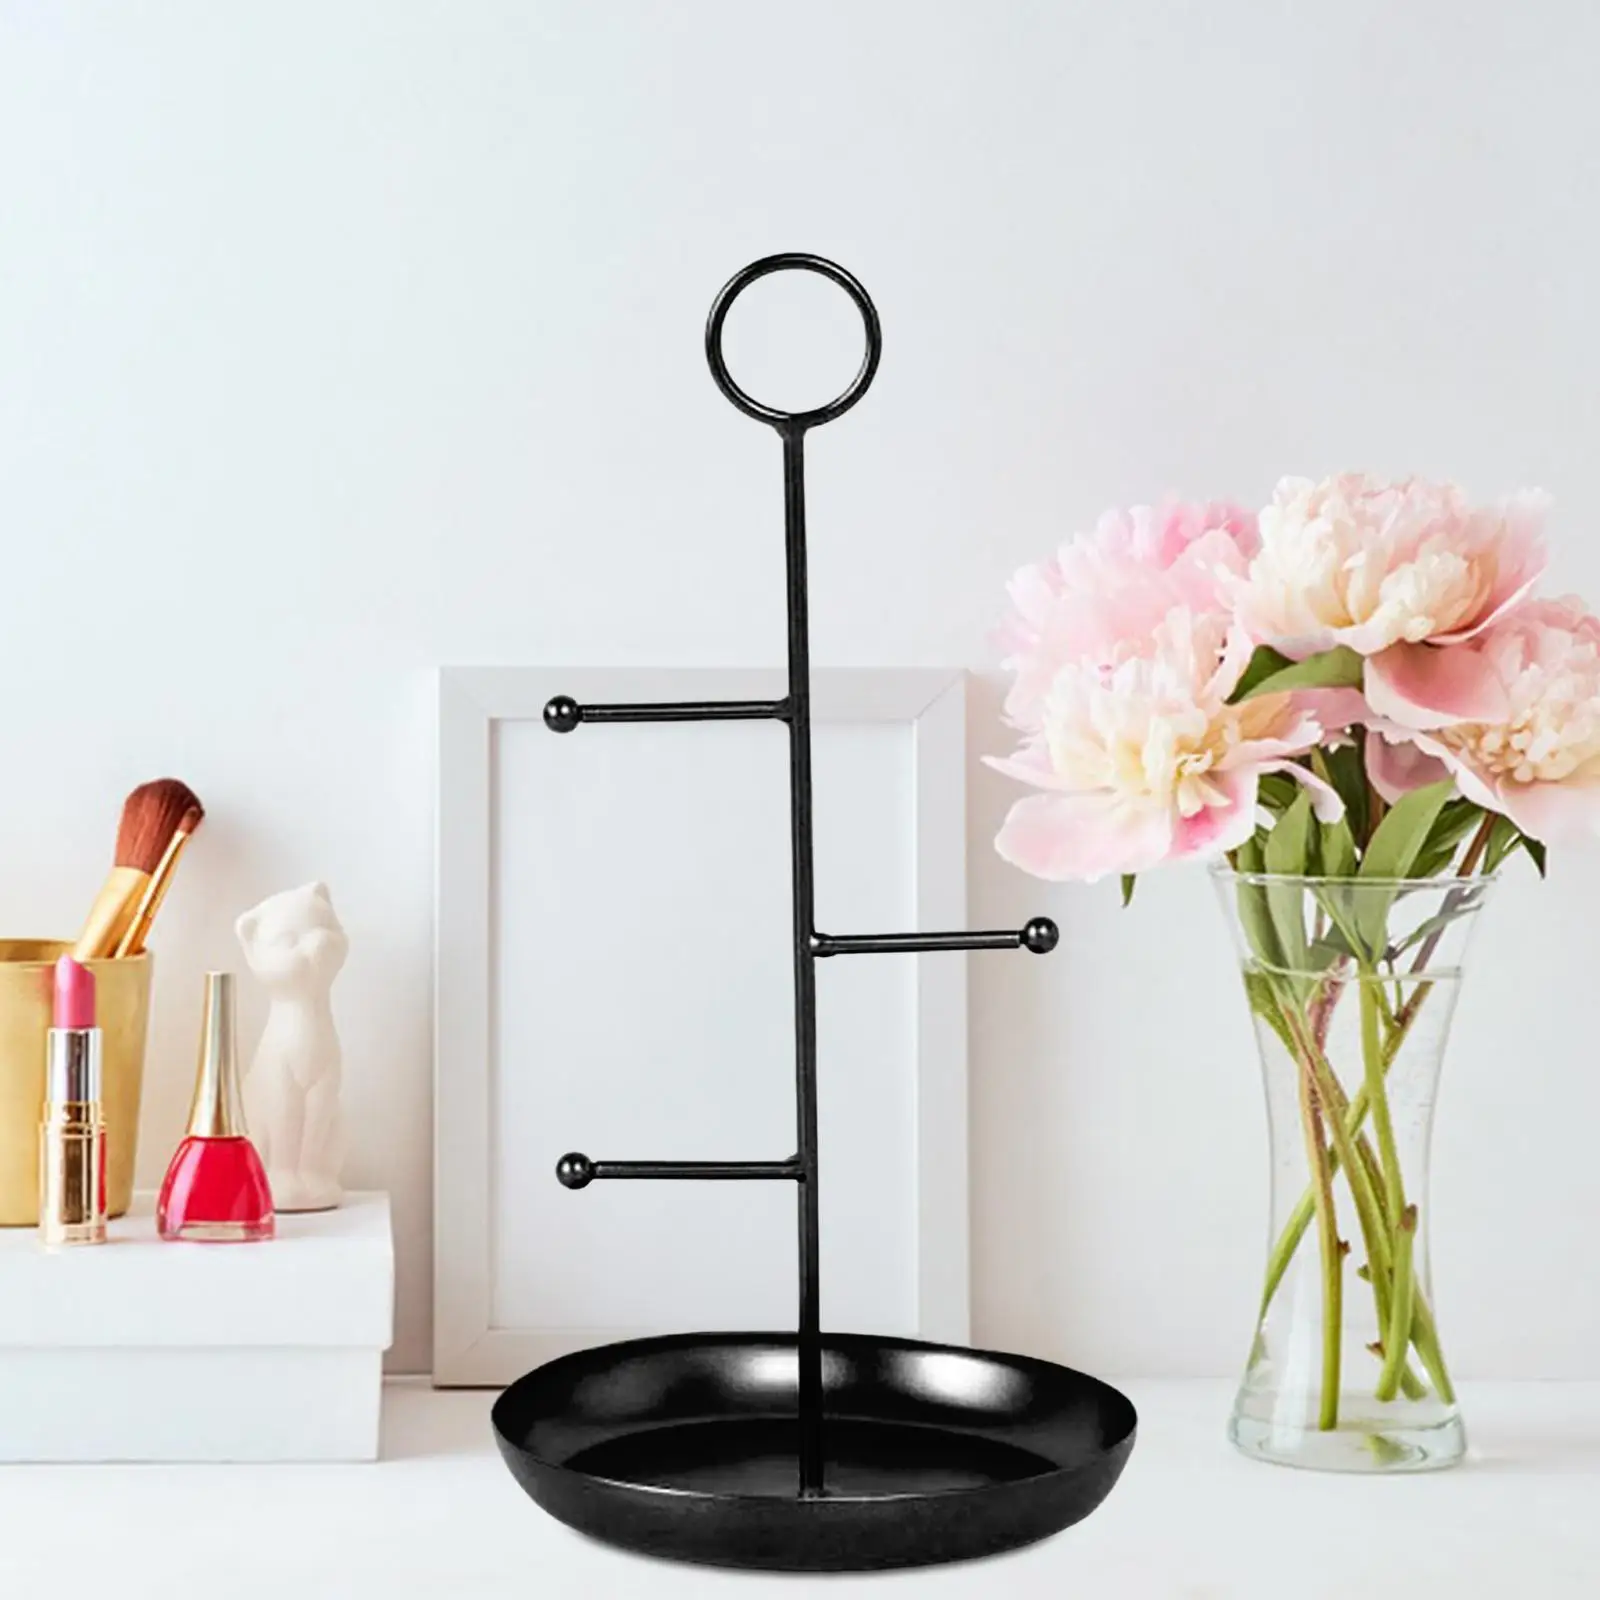 Tabletop Jewelry Shelf Jewelry Tower Hanging Organizer with Ring Tray for Women Girls Ladies Multifunctional Novelty 17.5x36cm